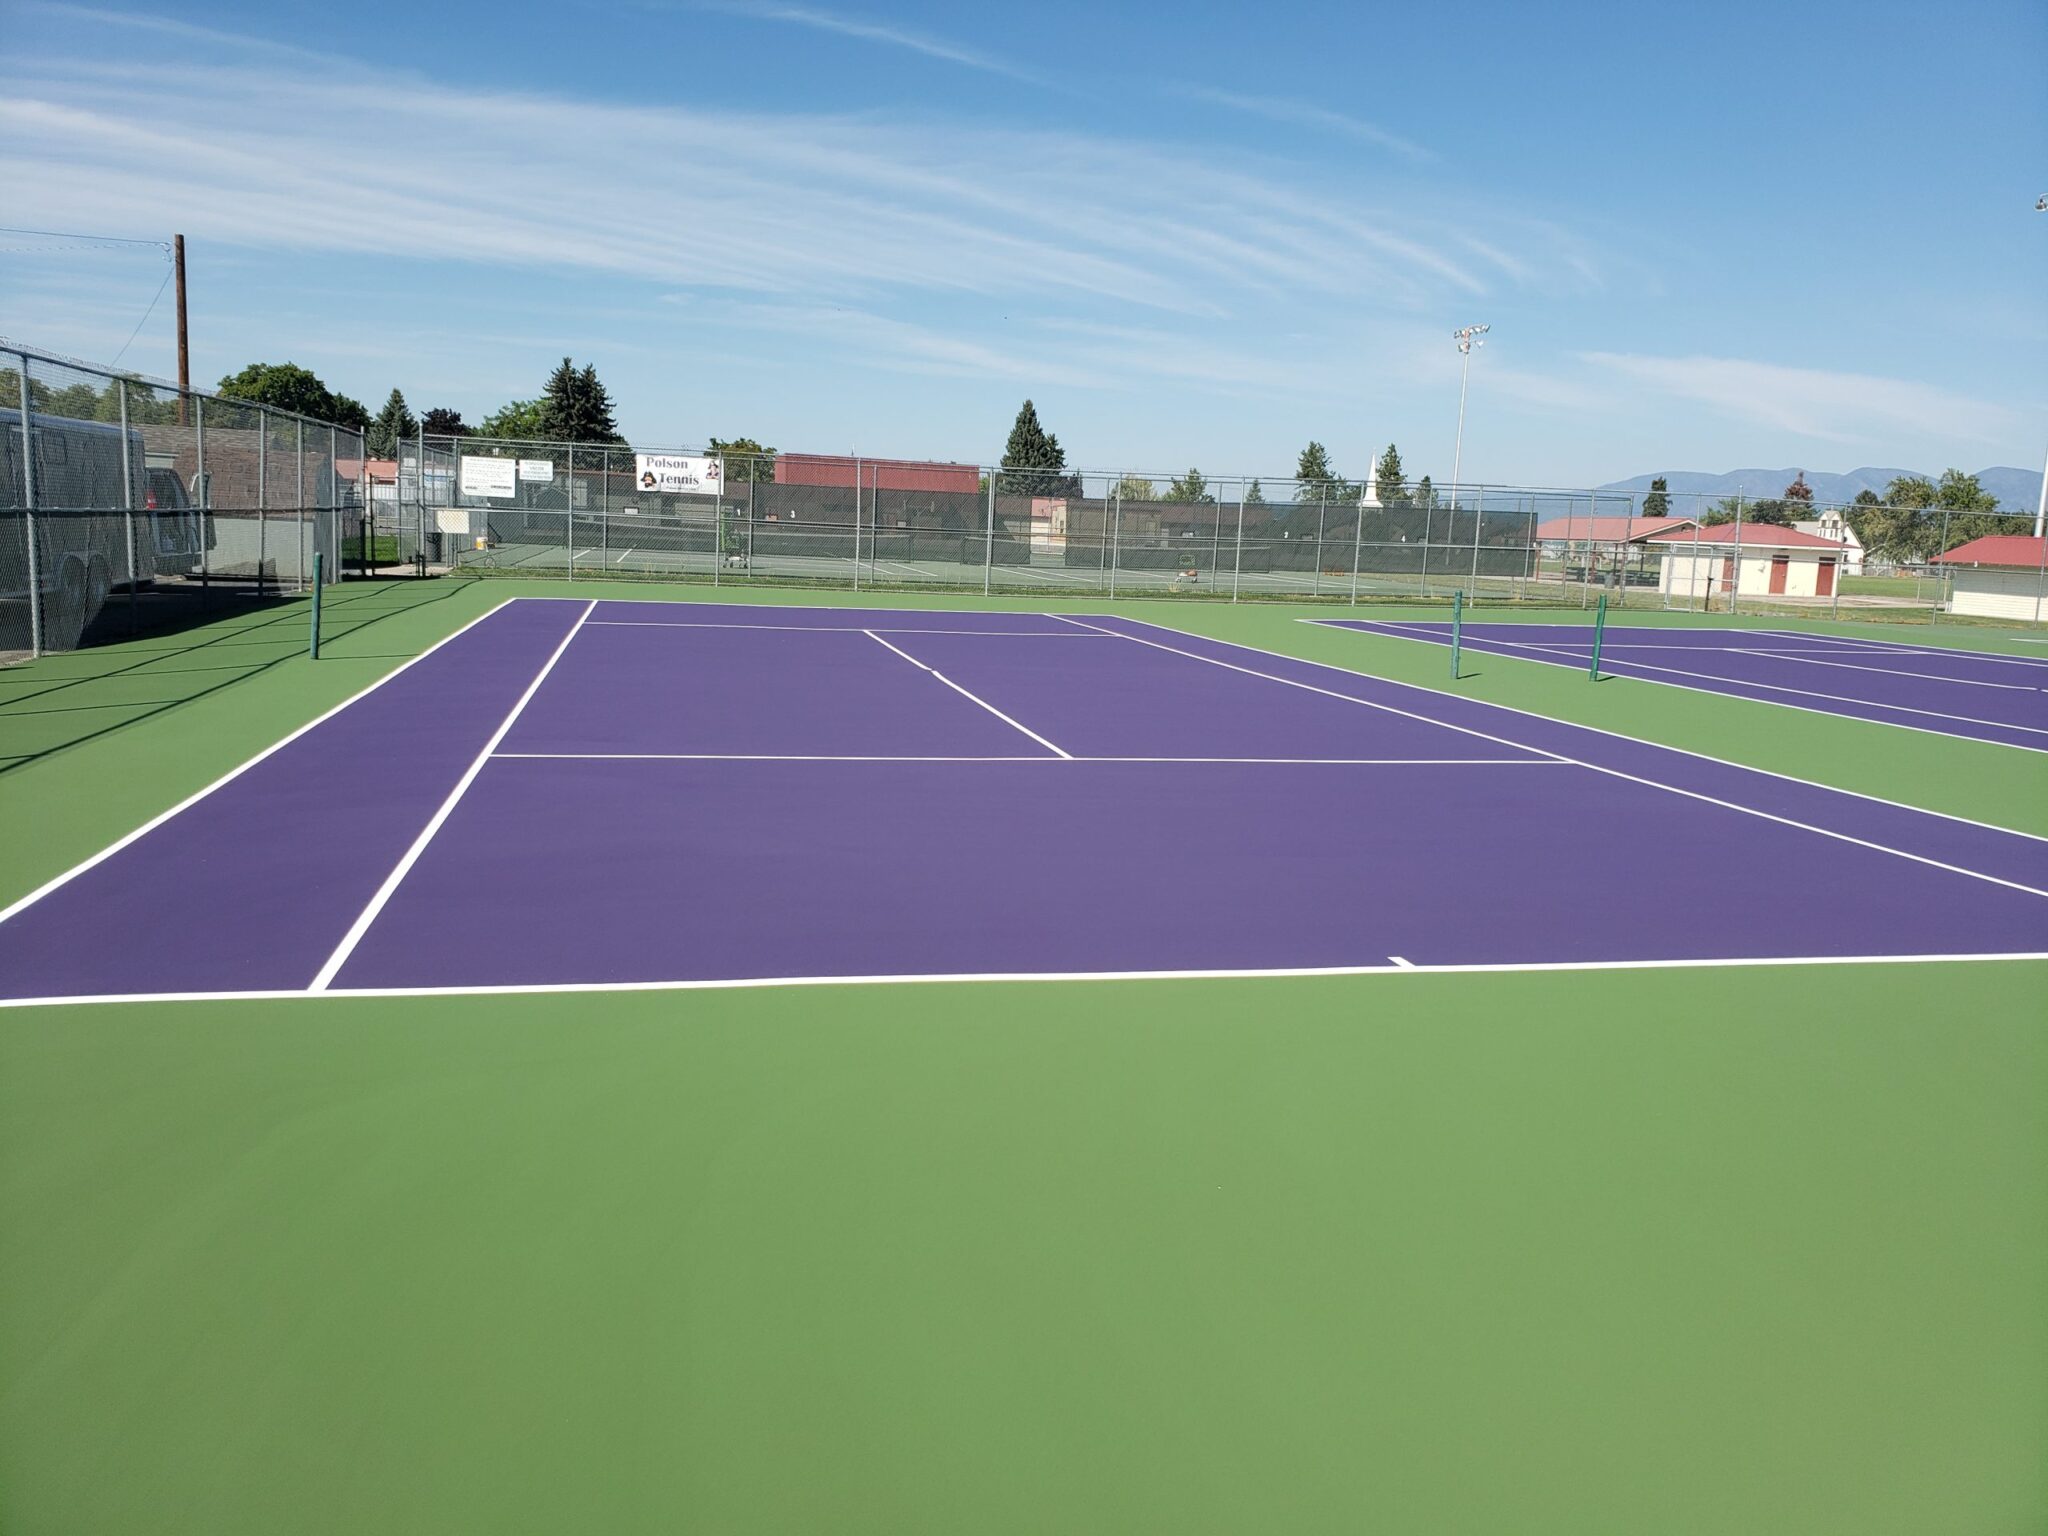 A new tennis court complex with fencing that includes green, purple, and white colors.